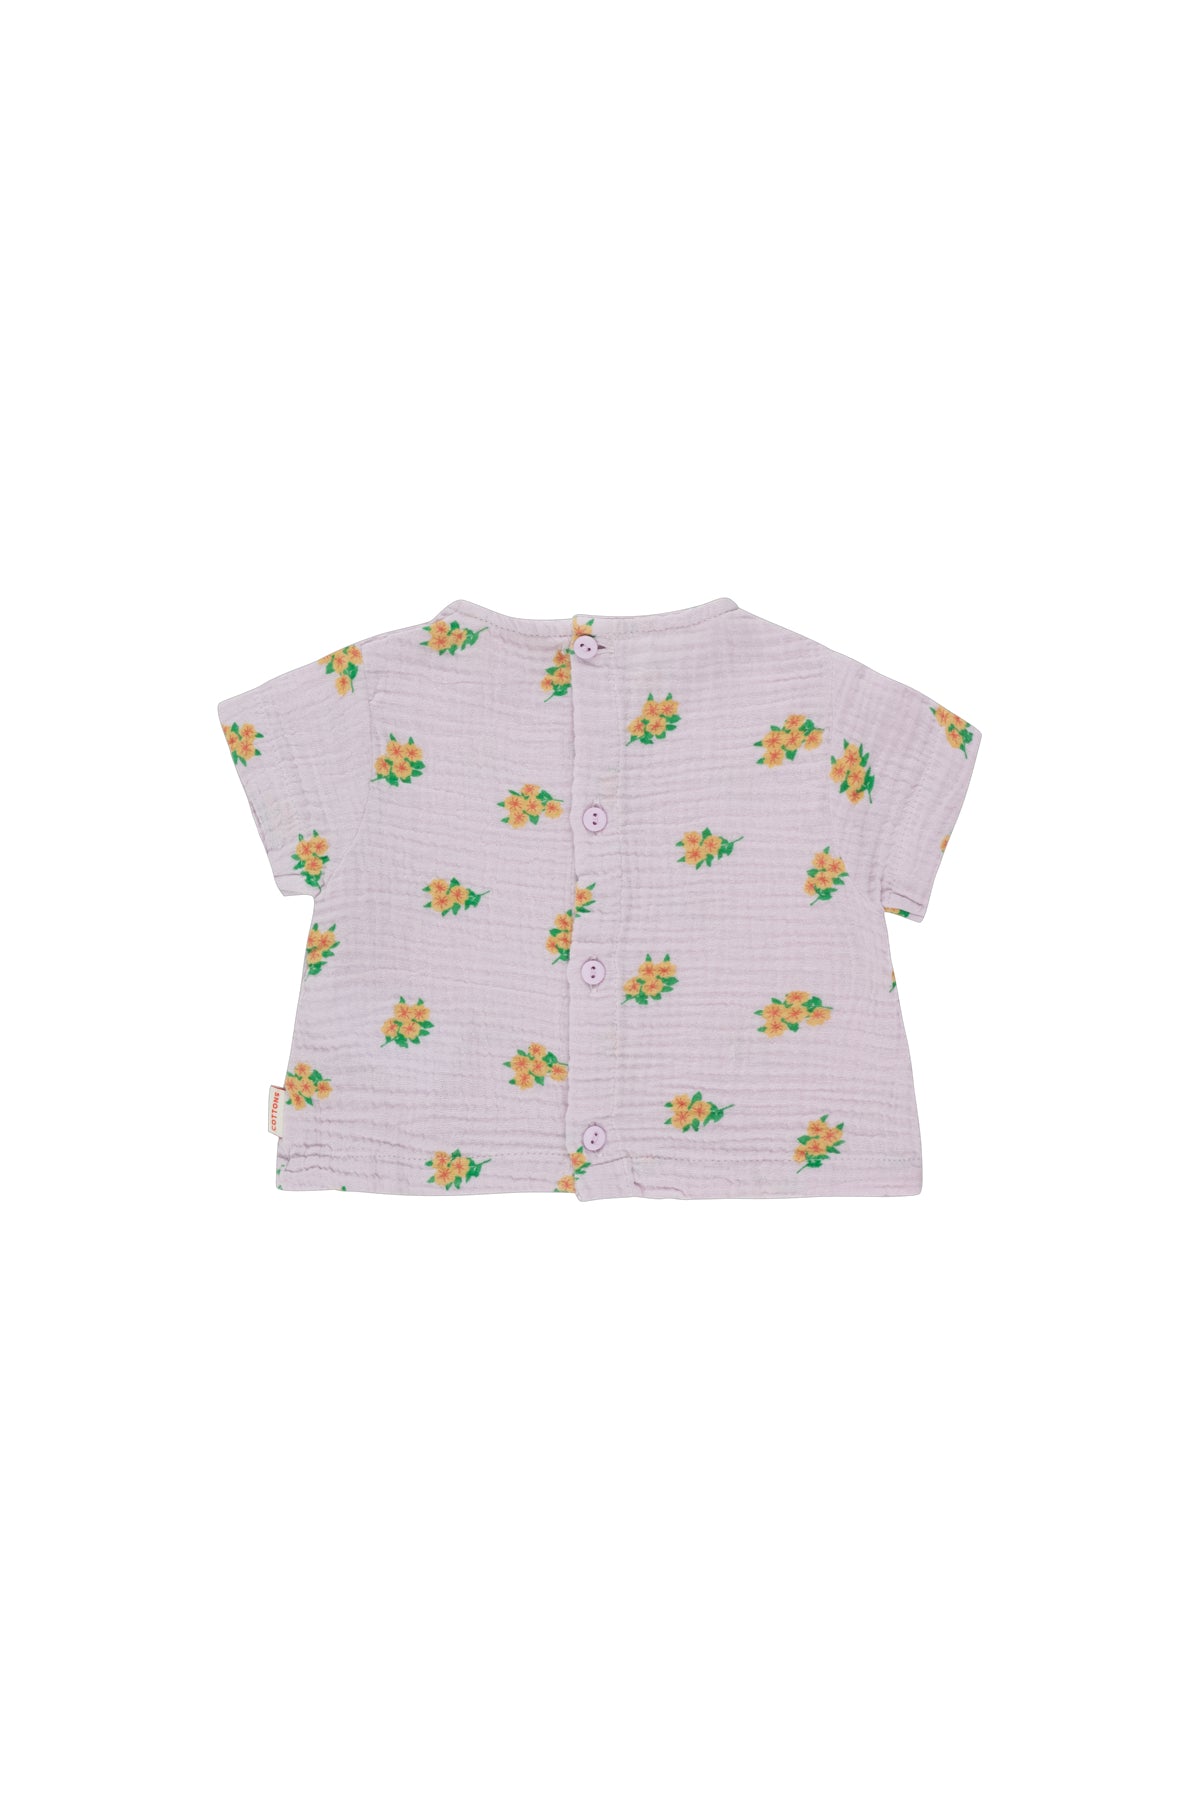 Tiny Cottons Flowers Baby Shirt